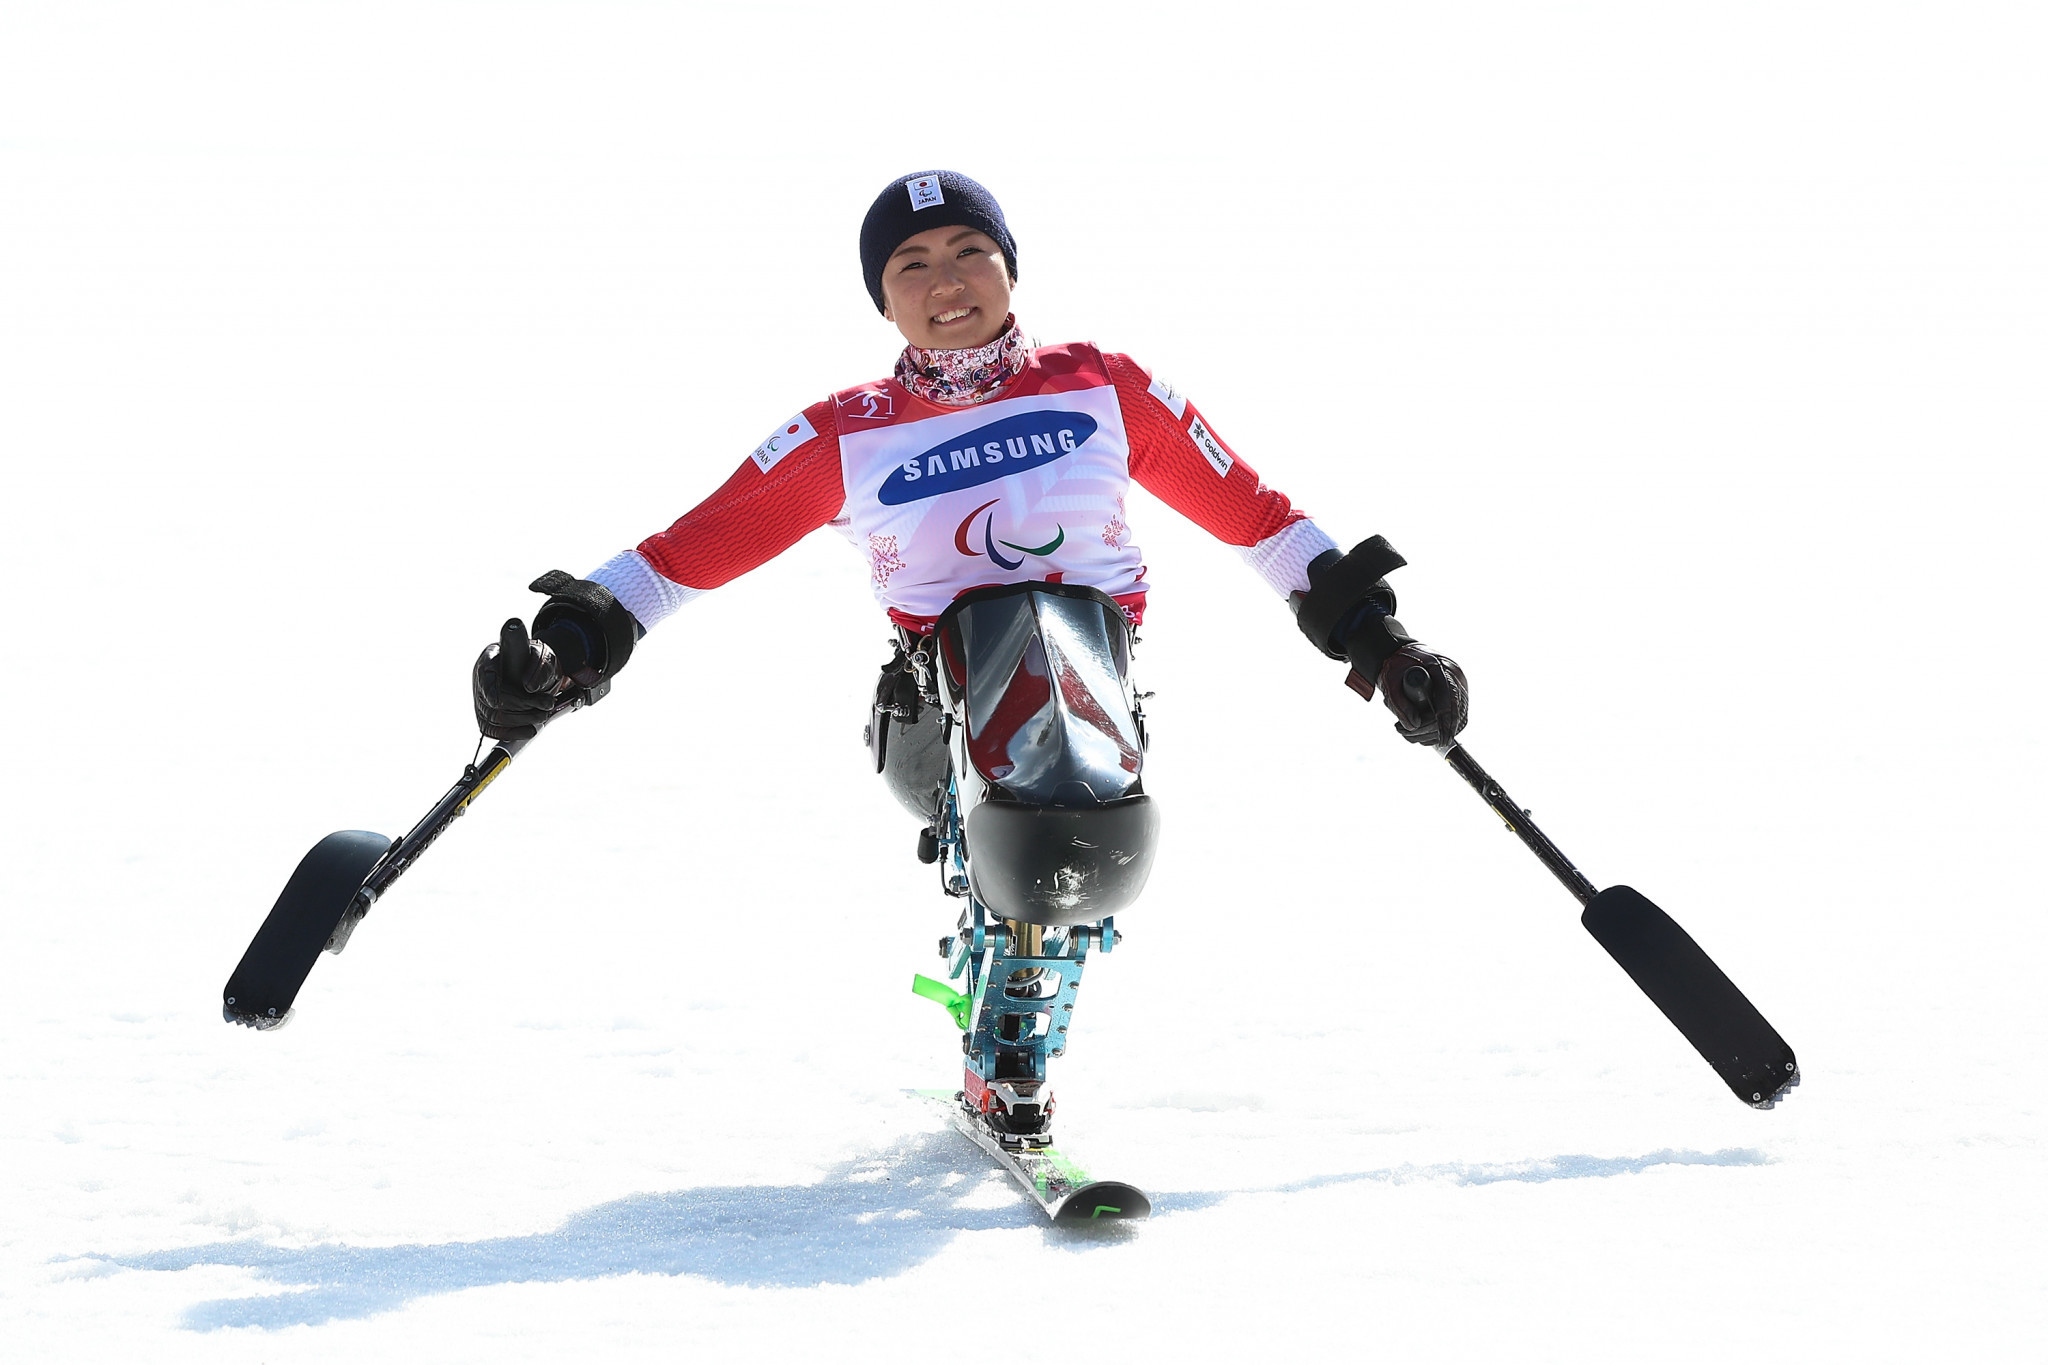 Japan's Momoka Muraoka celebrates after winning her country's first gold medal at the Games in the women's giant slalom sitting at the Jeongseon Alpine Centre ©Getty Images